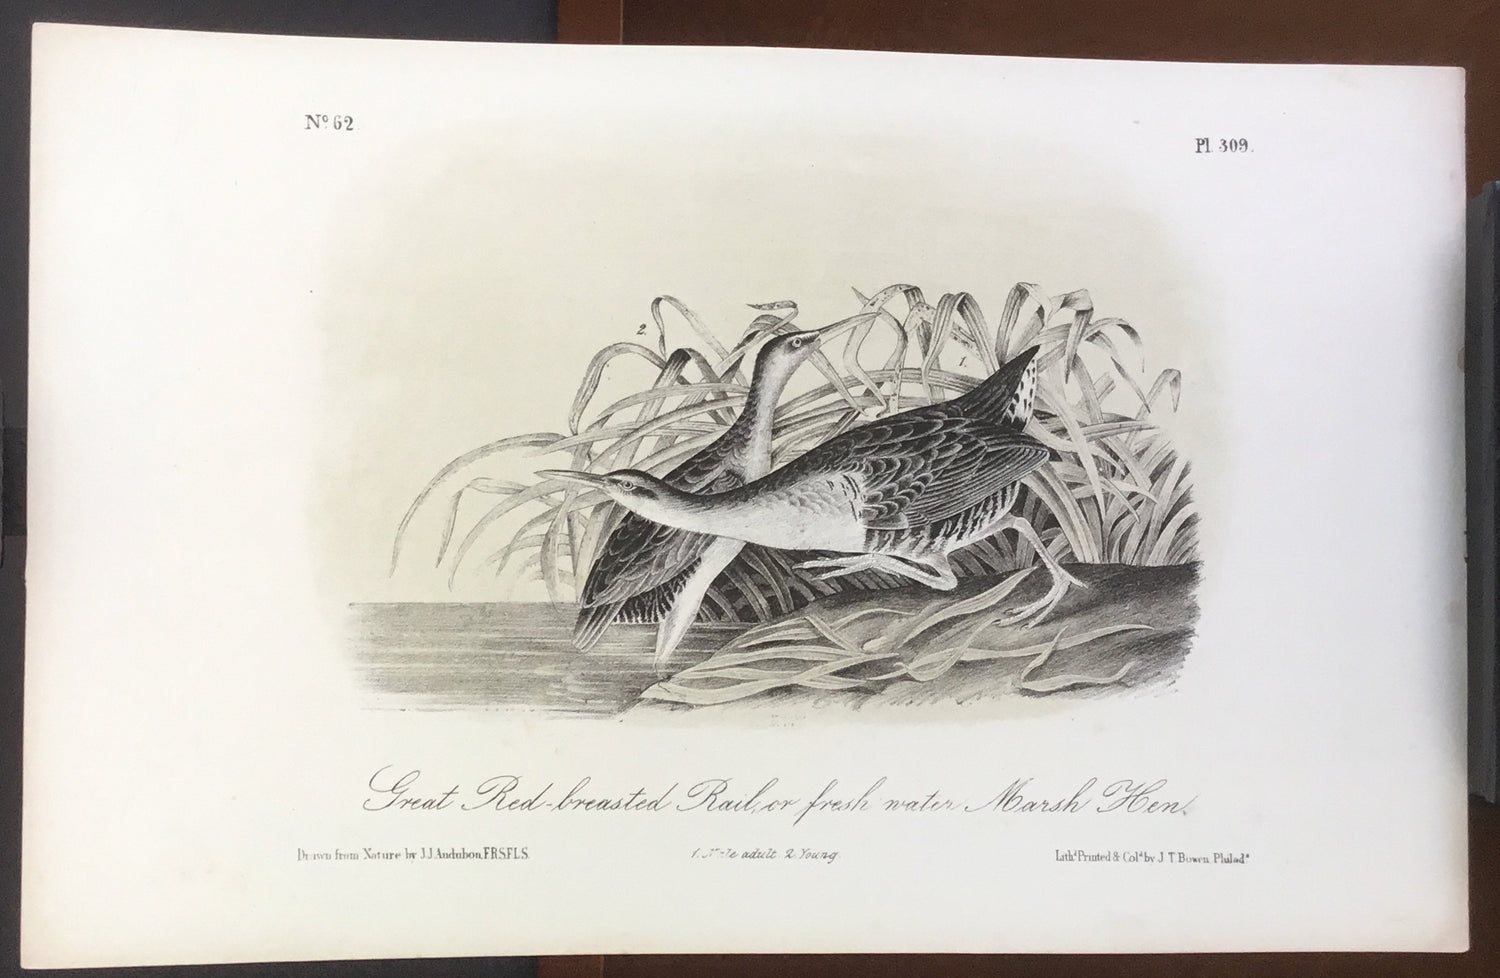 Audubon Octavo Great Red-breasted Rail (2), plate 309, uncolored test sheet, 7 x 11